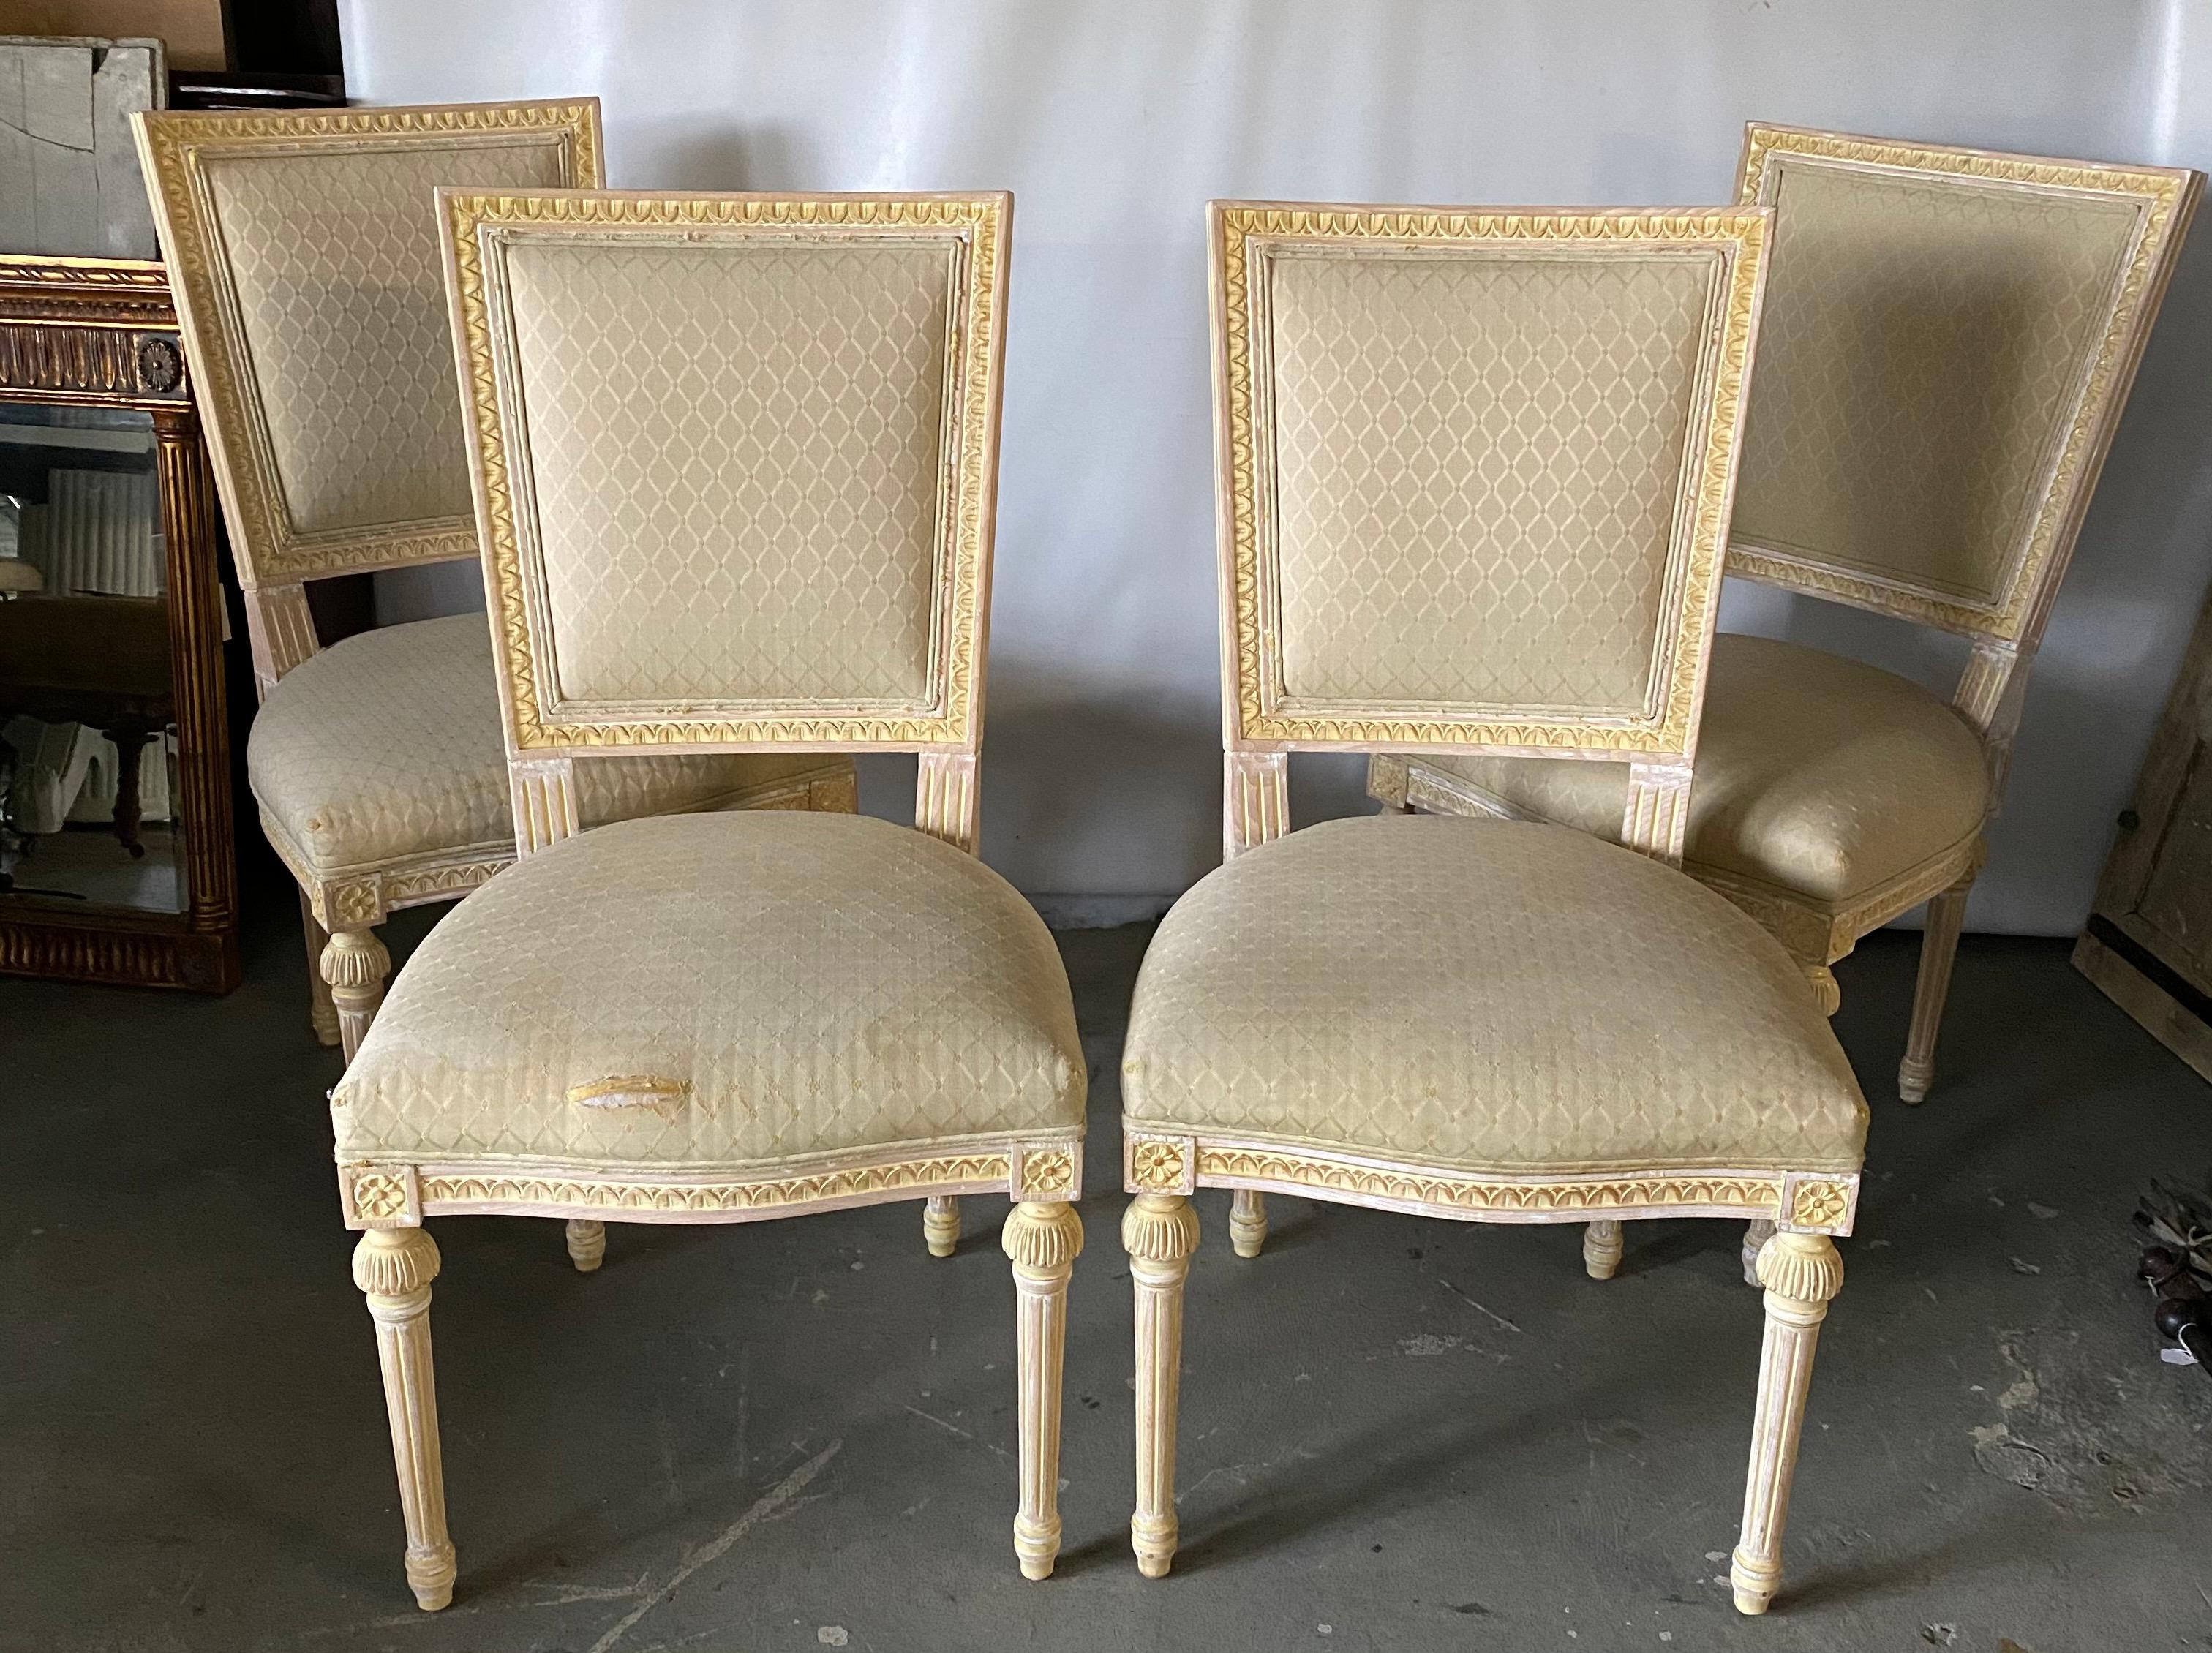 A set of refined and striking Louis XVI style dining side chairs. These beautiful chairs are painted in a soft, creamy white. The chairs have squared upholstered back and seats, fluted, tapered legs characteristic of the Louis XVI style and give